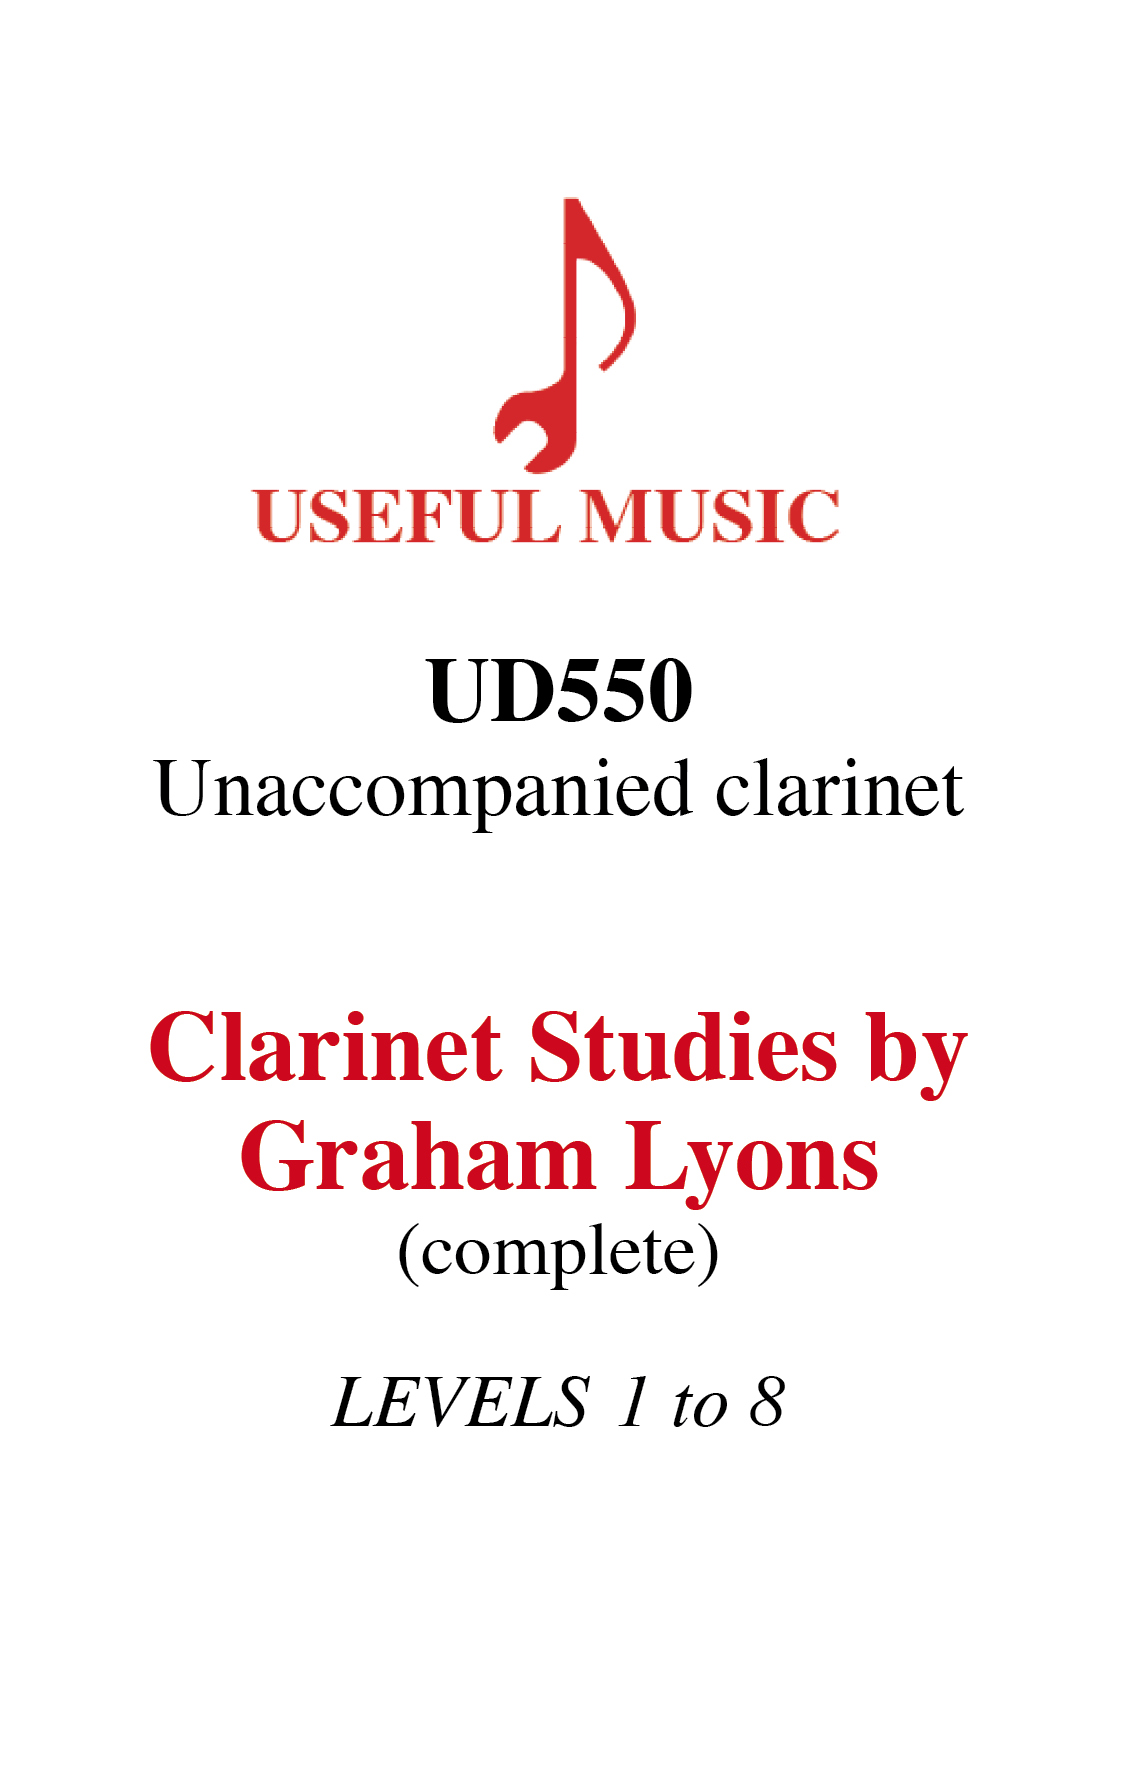 Collected Clarinet Studies by Graham Lyons